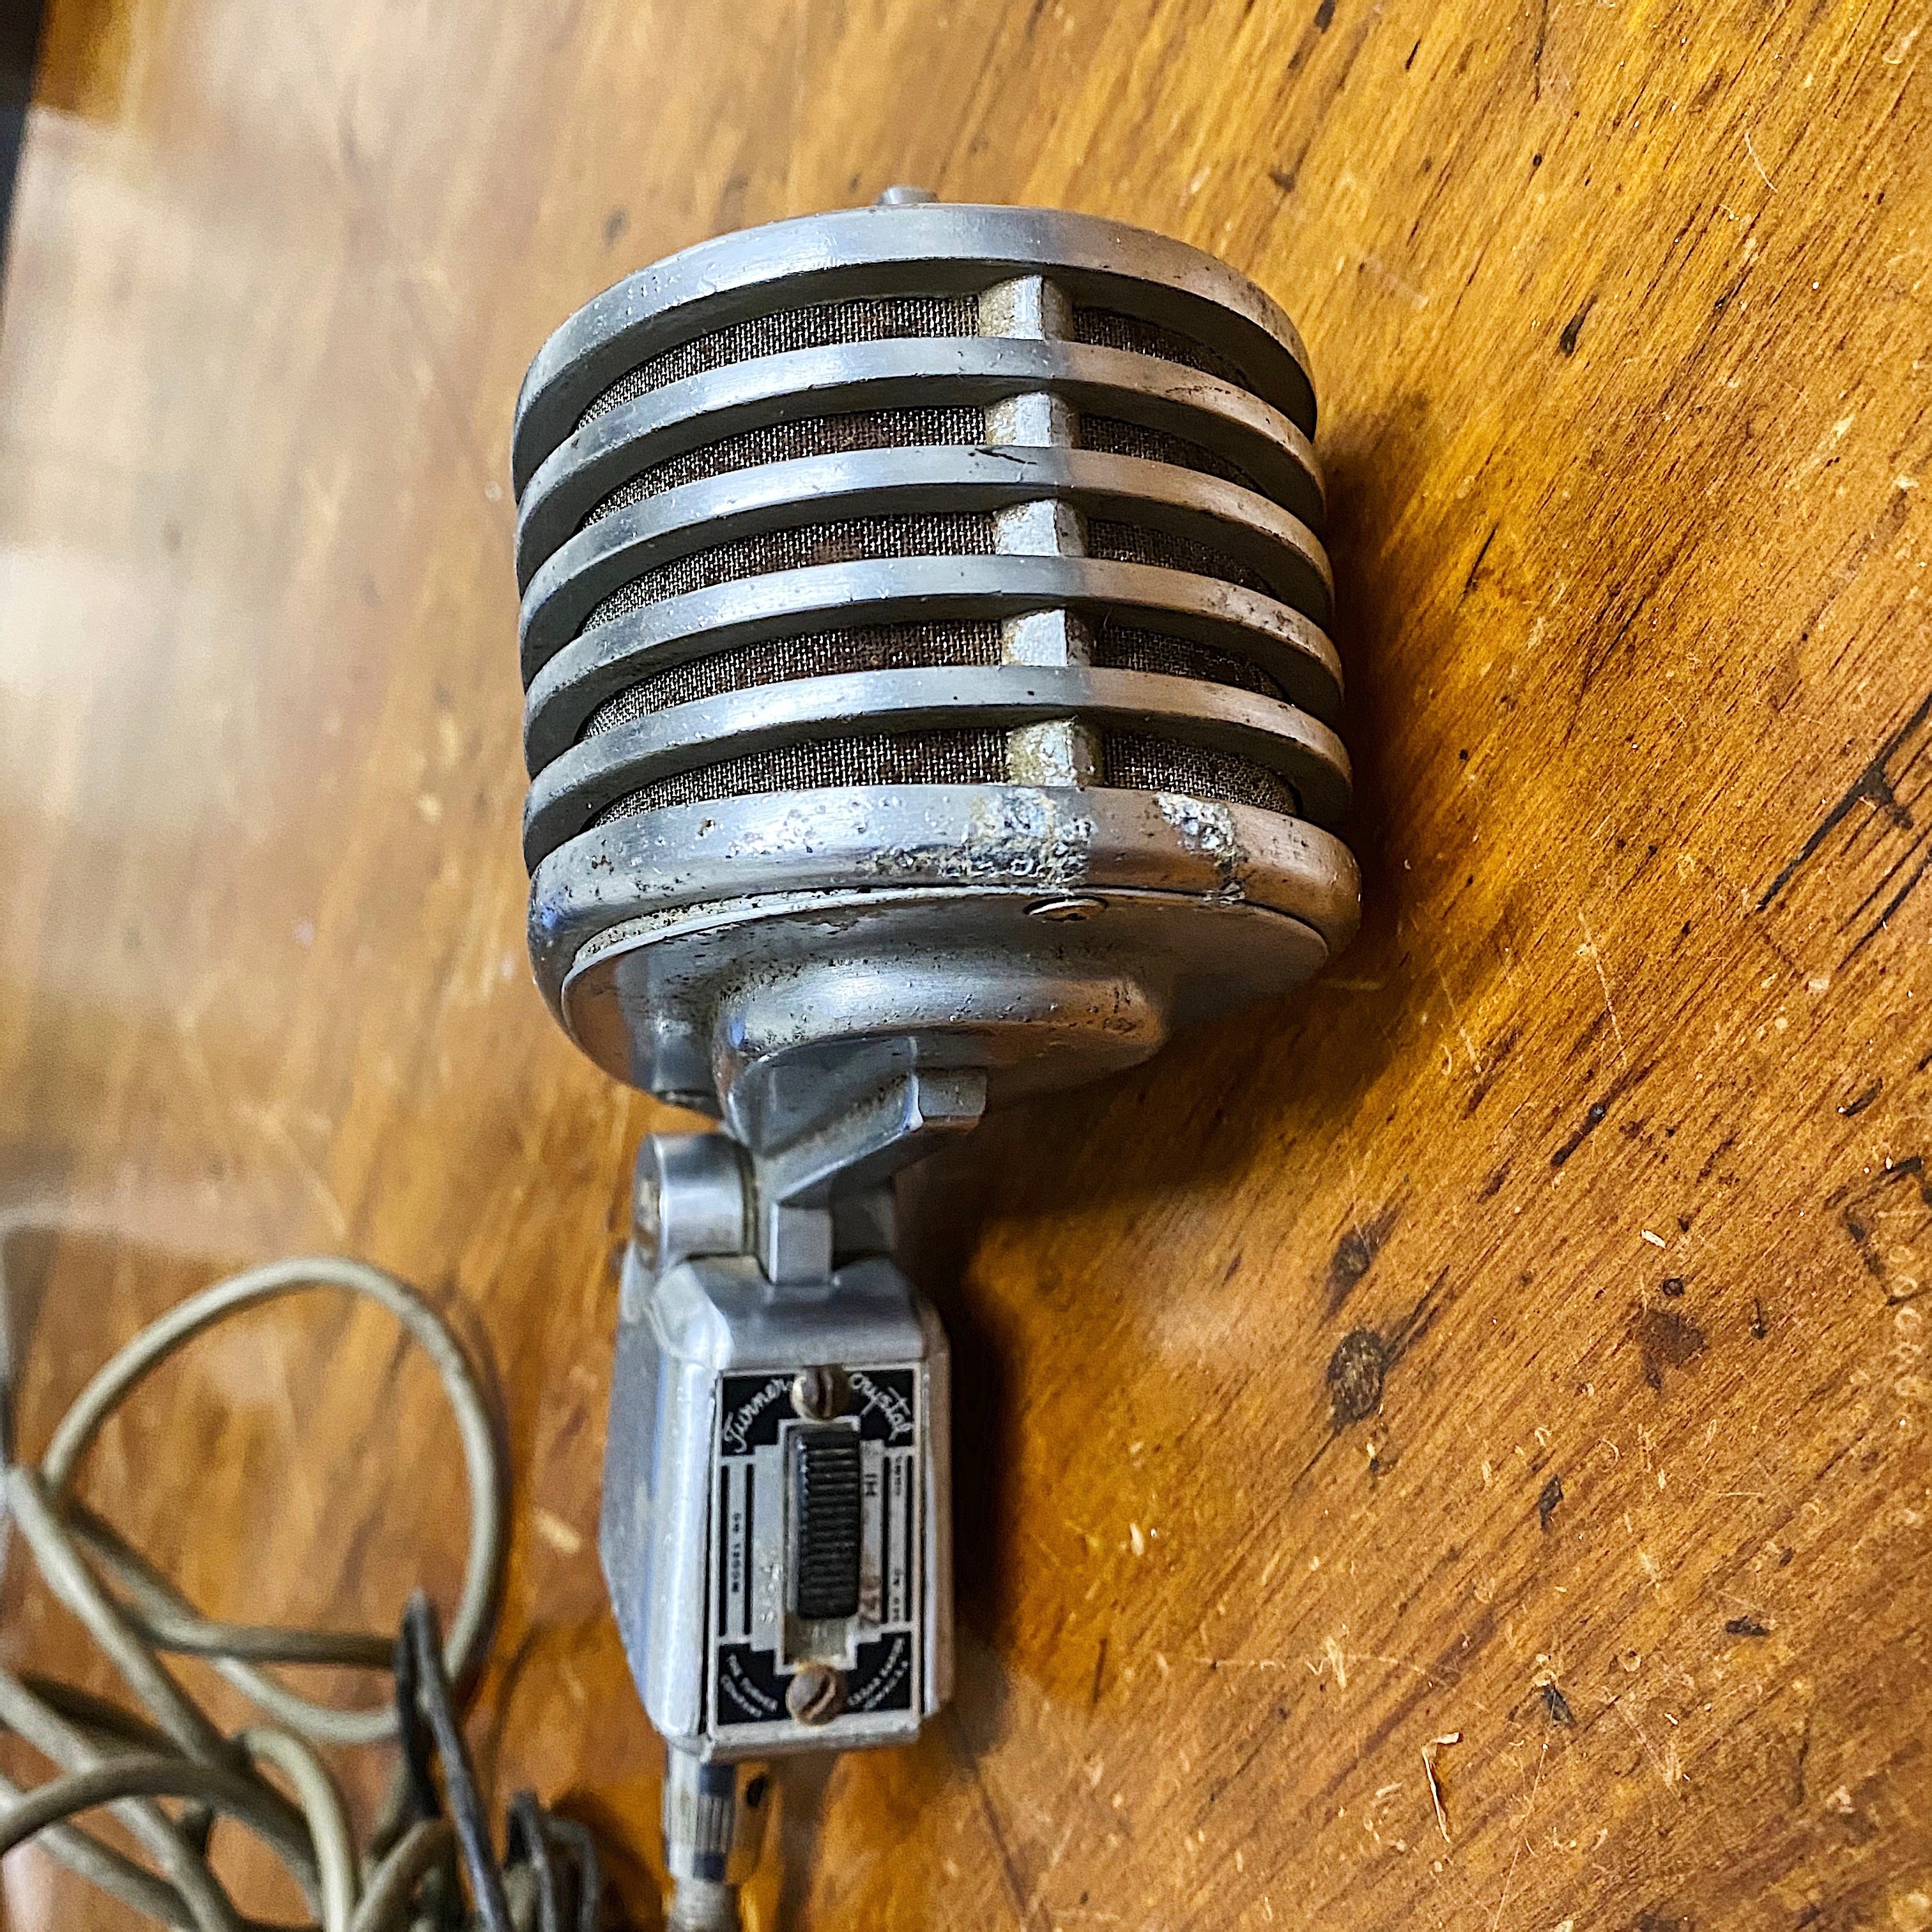 Vintage Turner 34X Crystal Microphone - Rare 1940s Musical Instrument - As Is - Not Tested - Rockabilly Rat Rod Hood Ornament?